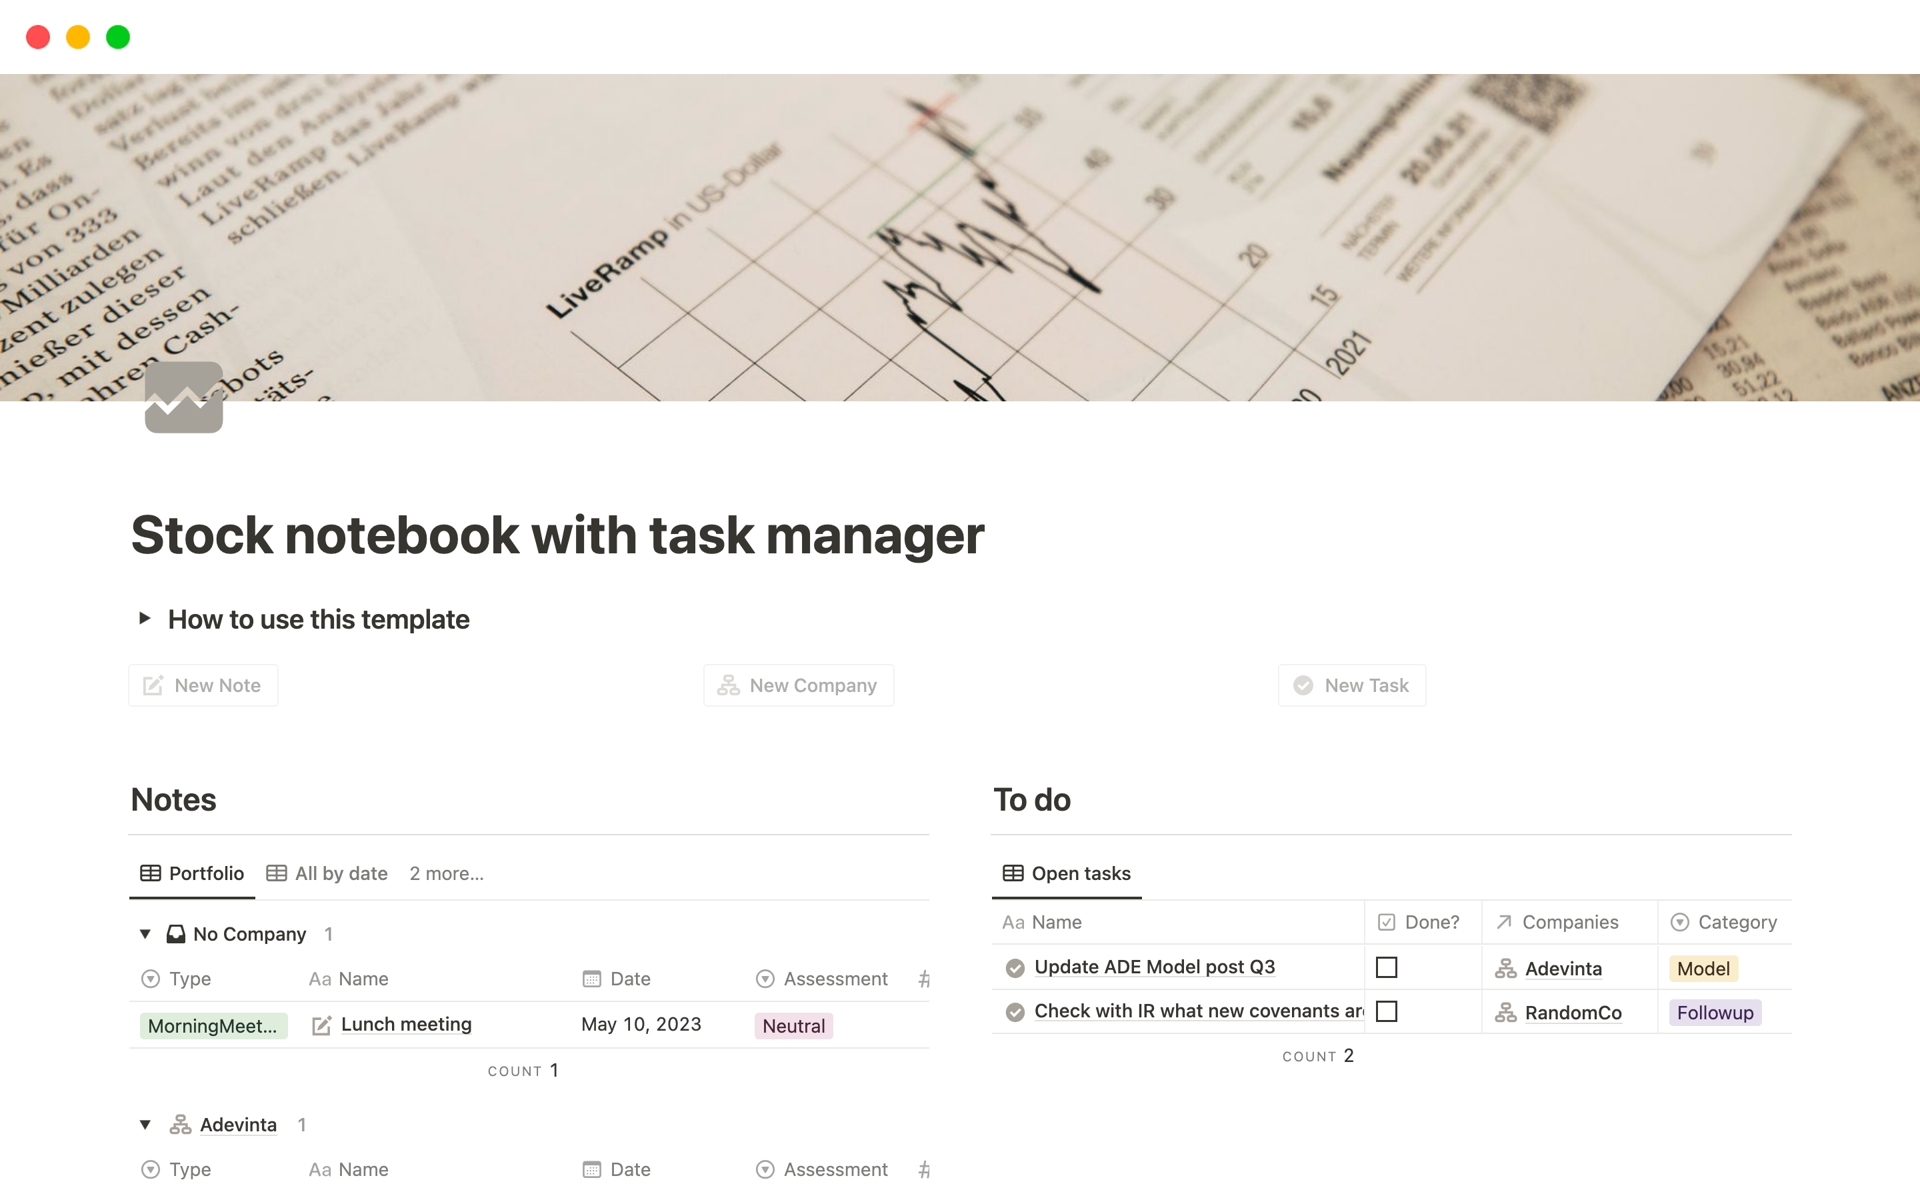 Note-taking and task manager for investors, professionals in investment banking and Asset Management. 